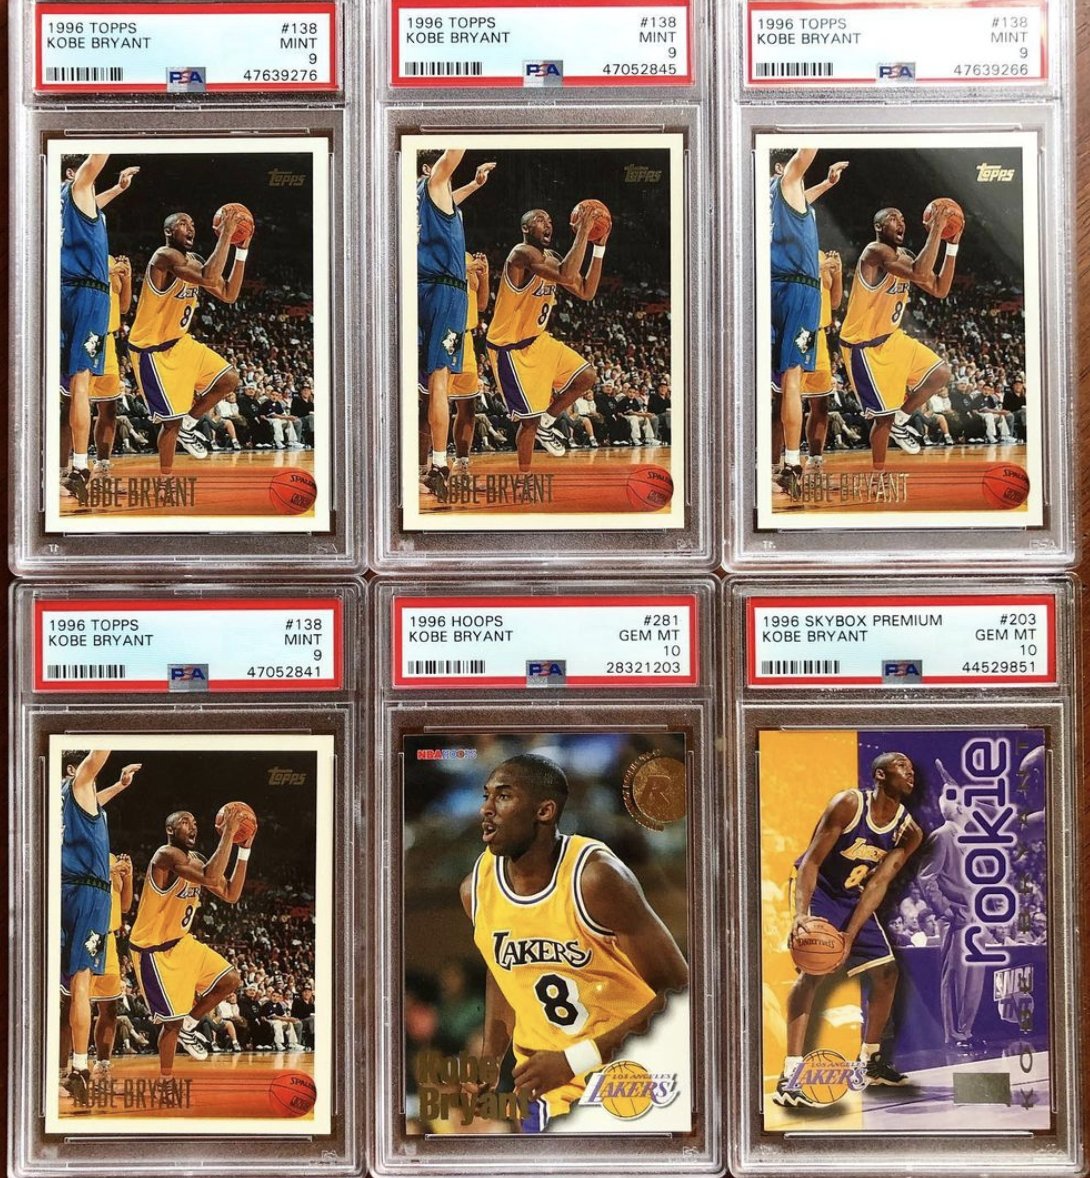 Looking for a safe sports card investment?Kobe Bryant is a great place to start.Now you gotta be able to hold for the long run.We personally can't buy enough Kobe, here's why ** Why We Buy Kobe Cards Thread **